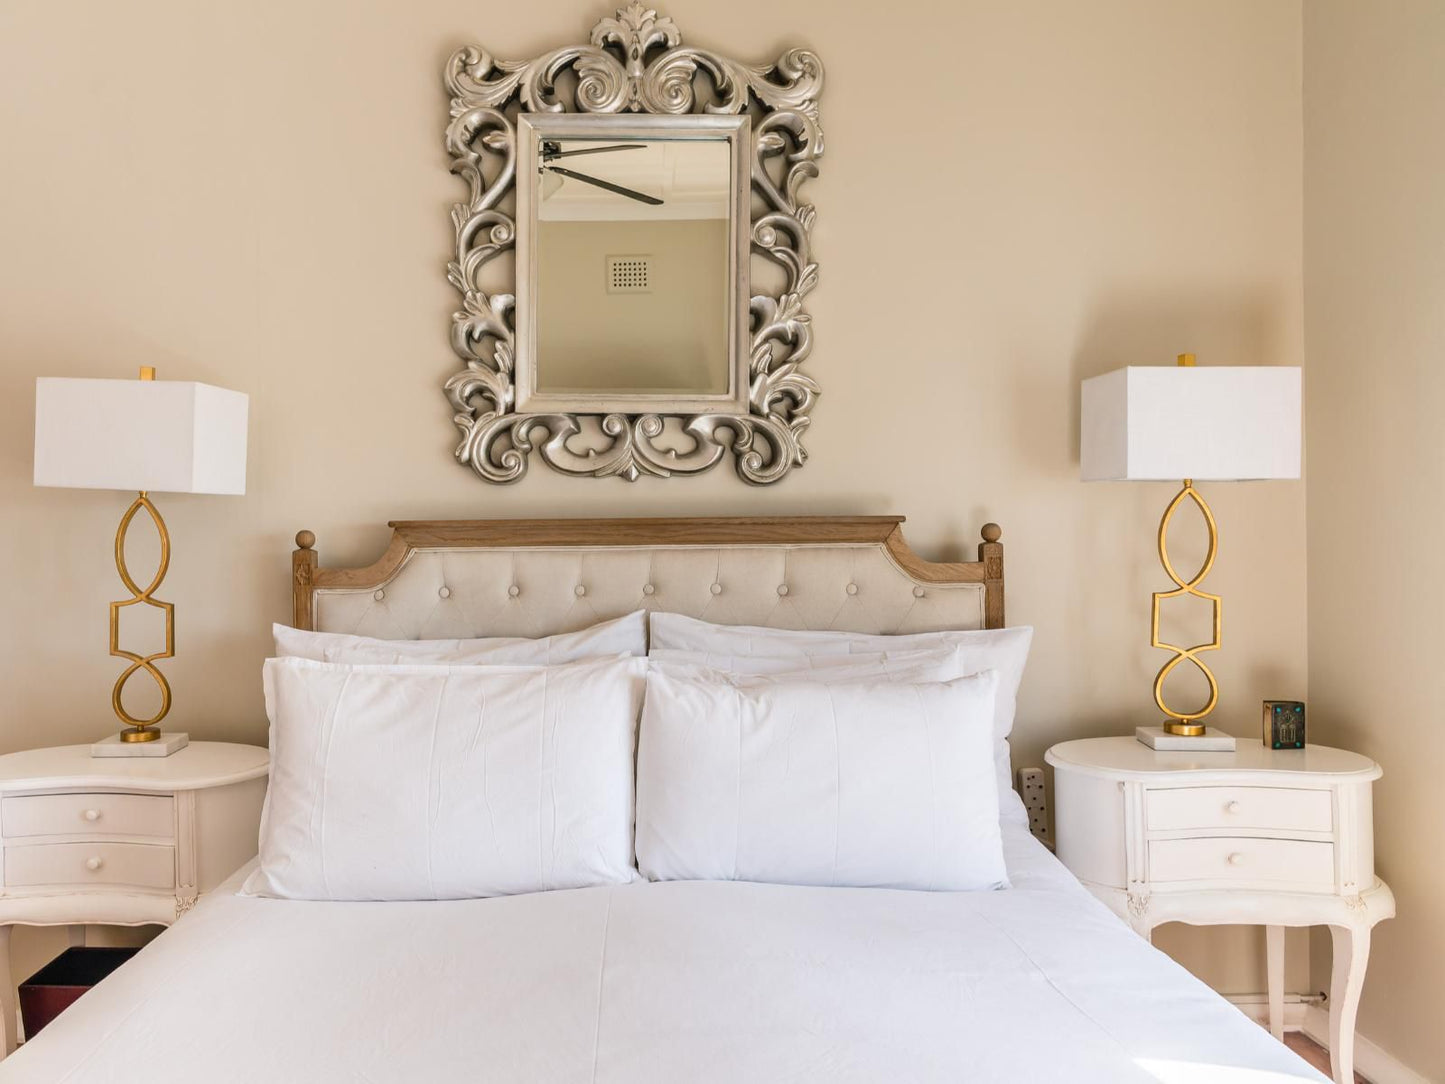 Vesper Apartments Green Point Cape Town Western Cape South Africa Bedroom